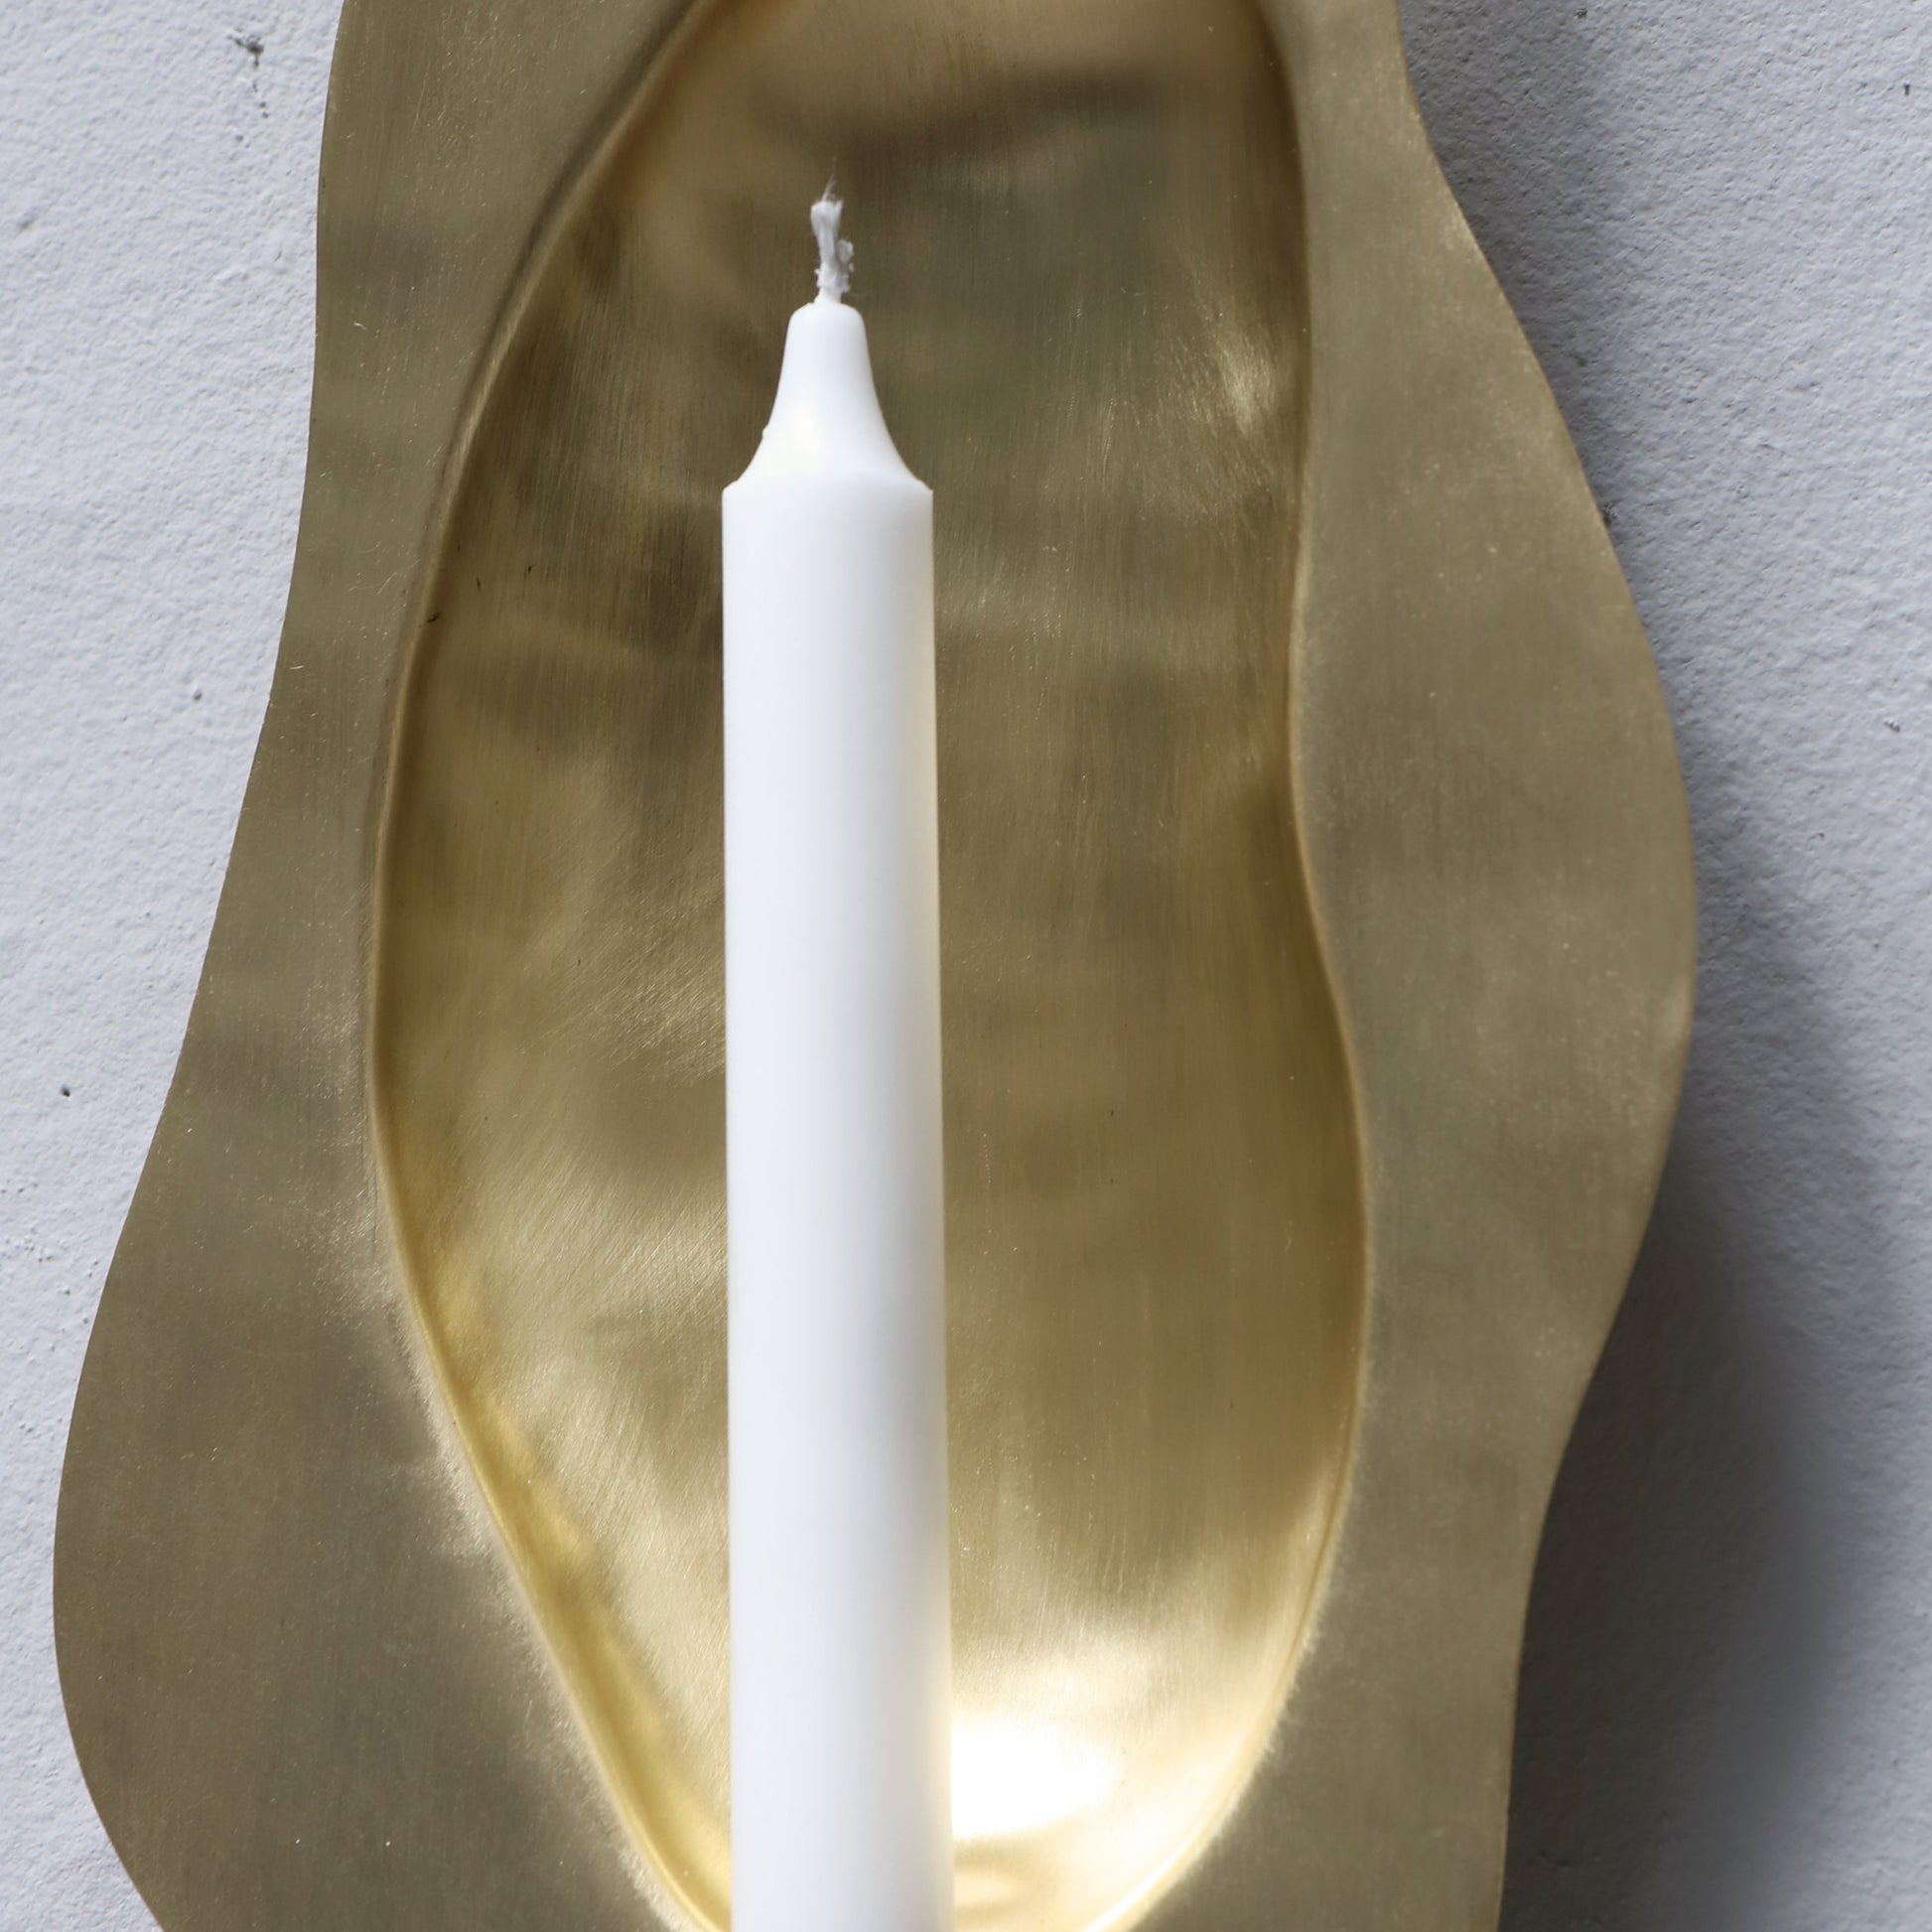 Brass candle holder designed by Christian+Jade Reflecting Flame